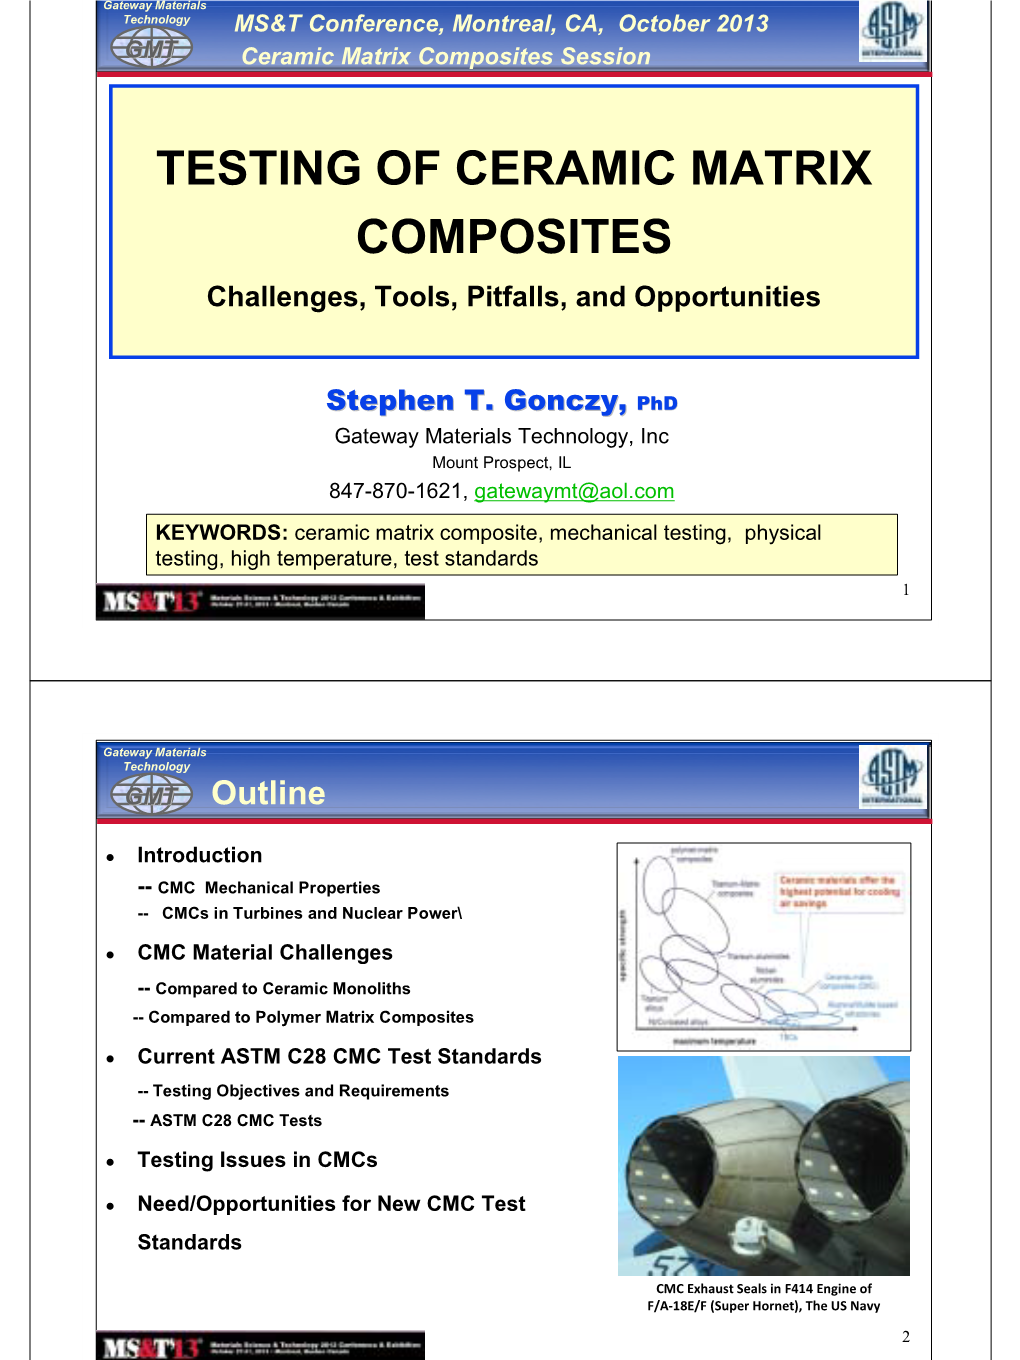 TESTING of CERAMIC MATRIX COMPOSITES Challenges, Tools, Pitfalls, and Opportunities